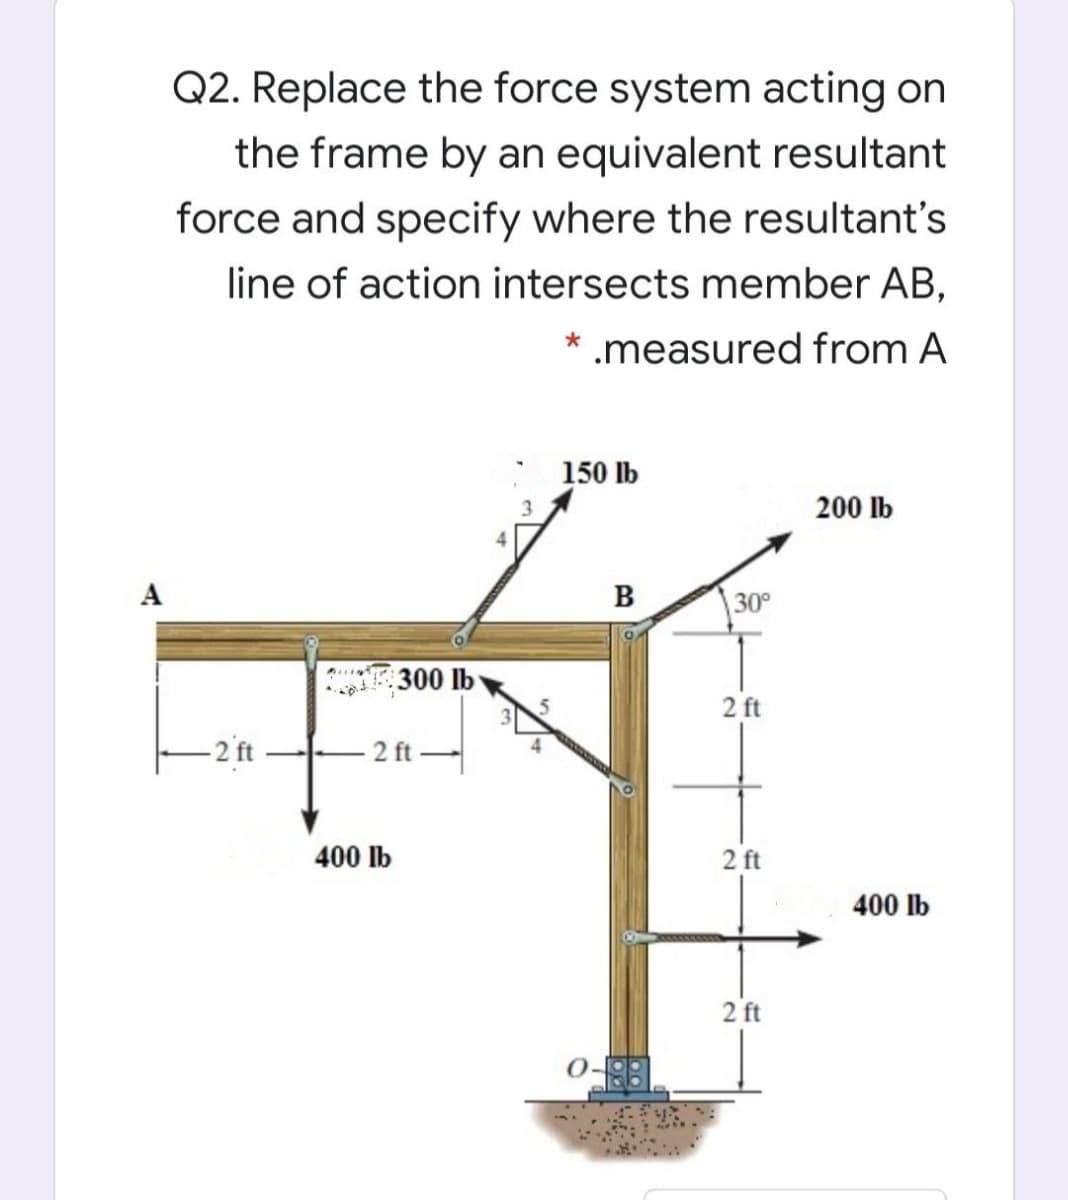 Q2. Replace the force system acting on
the frame by an equivalent resultant
force and specify where the resultant's
line of action intersects member AB,
* .measured from A
* 150 lb
3.
200 lb
A
B
30°
300 lb
2 ft
-2 ft
2 ft
400 lb
2 ft
400 lb
2 ft
